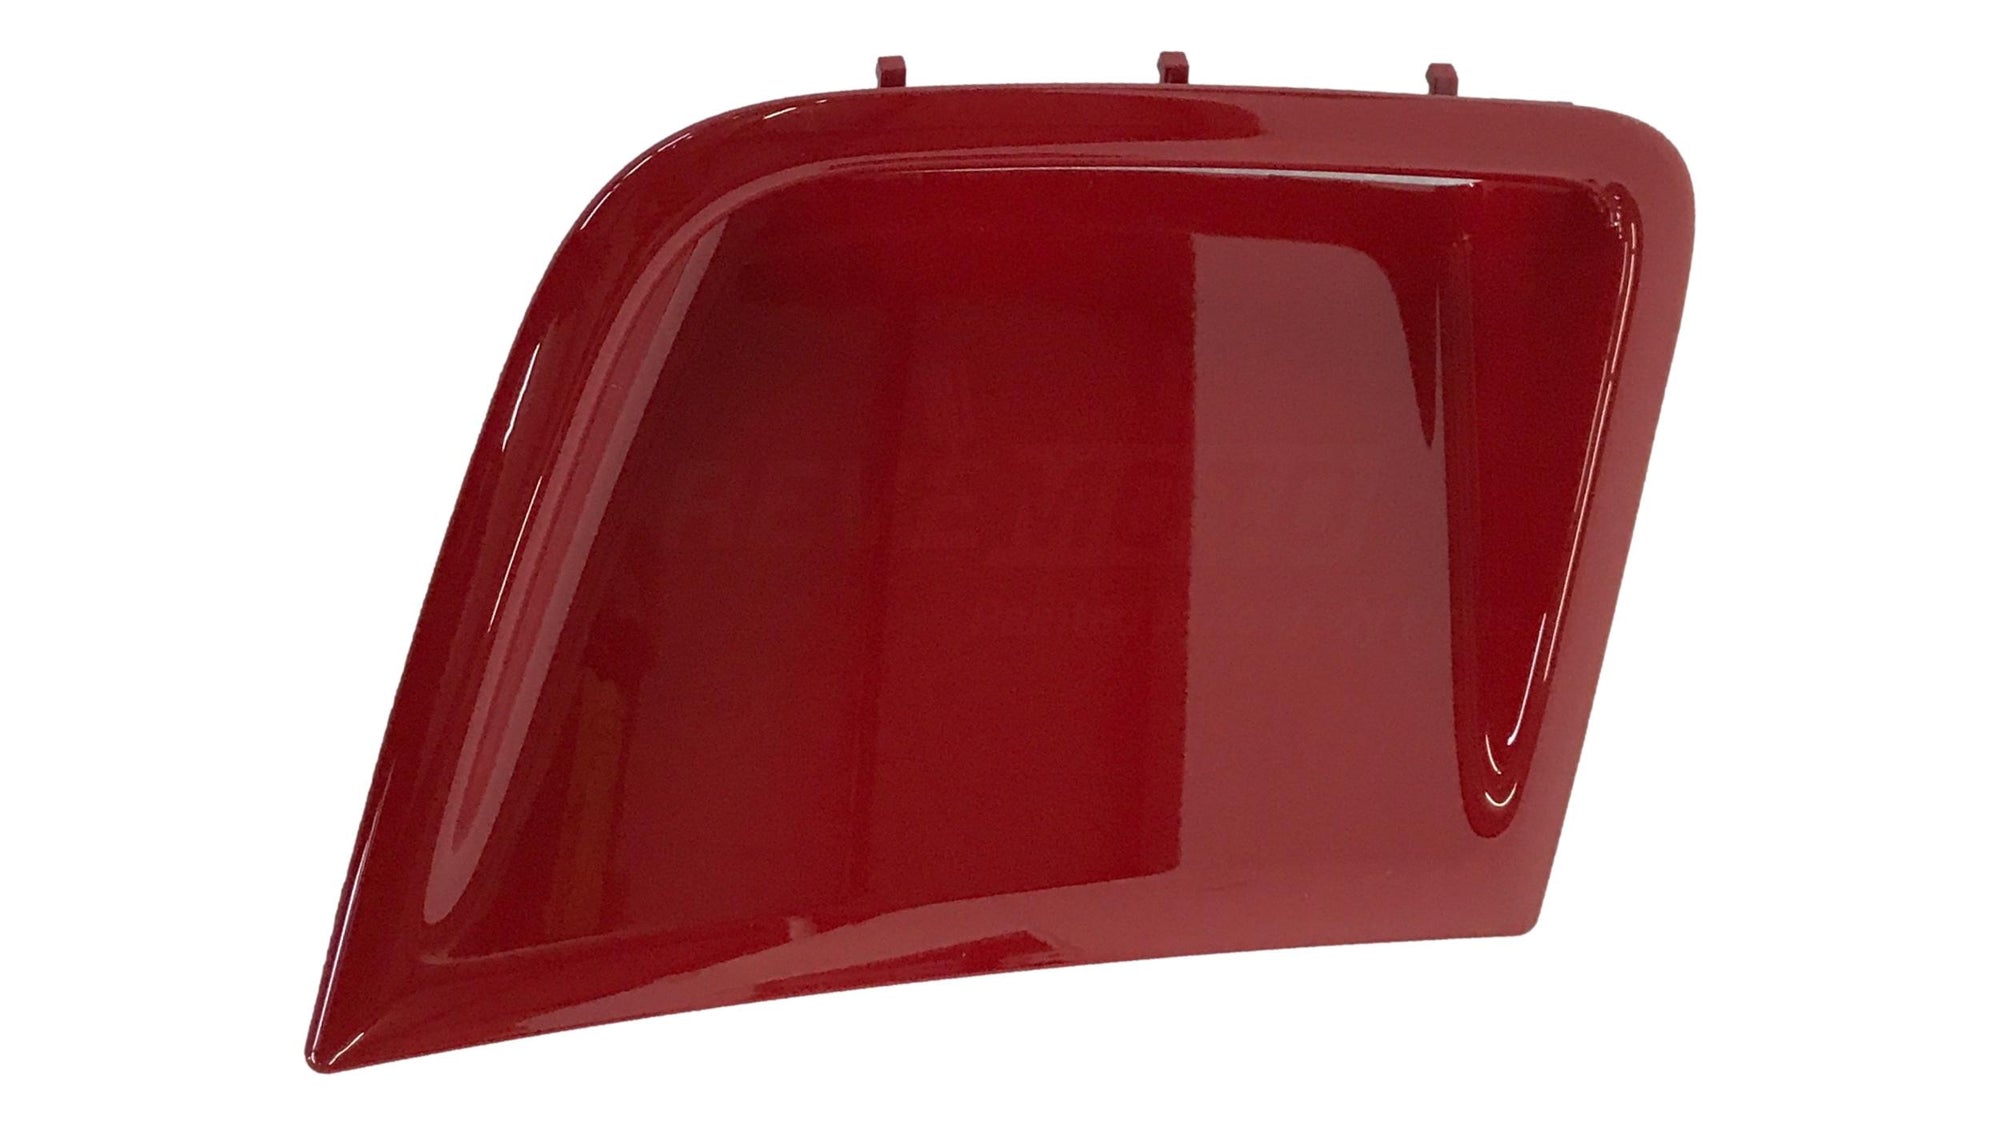 19723 2008-2014 Subaru Impreza Bumper Side Vent Painted (WITH_ 3 Vent Clips Included) Lightning Red (C7P) 57739FG010-57721FG000_clipped_rev_1